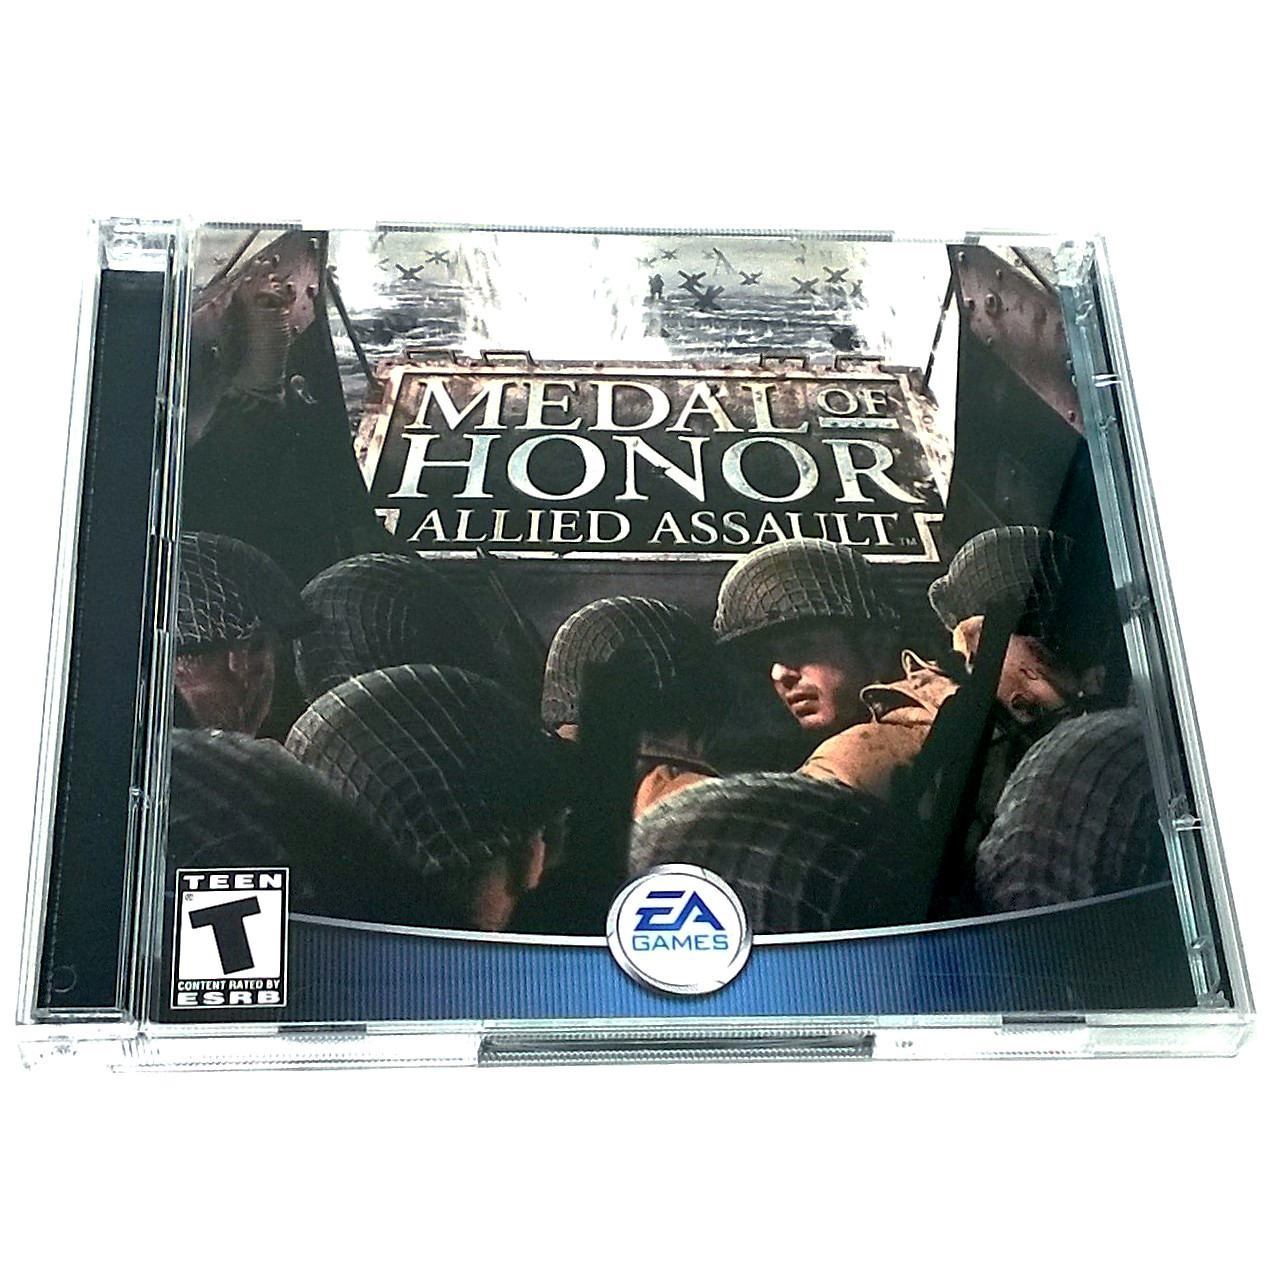 Medal of Honor: Allied Assault for PC CD-ROM - Front of case